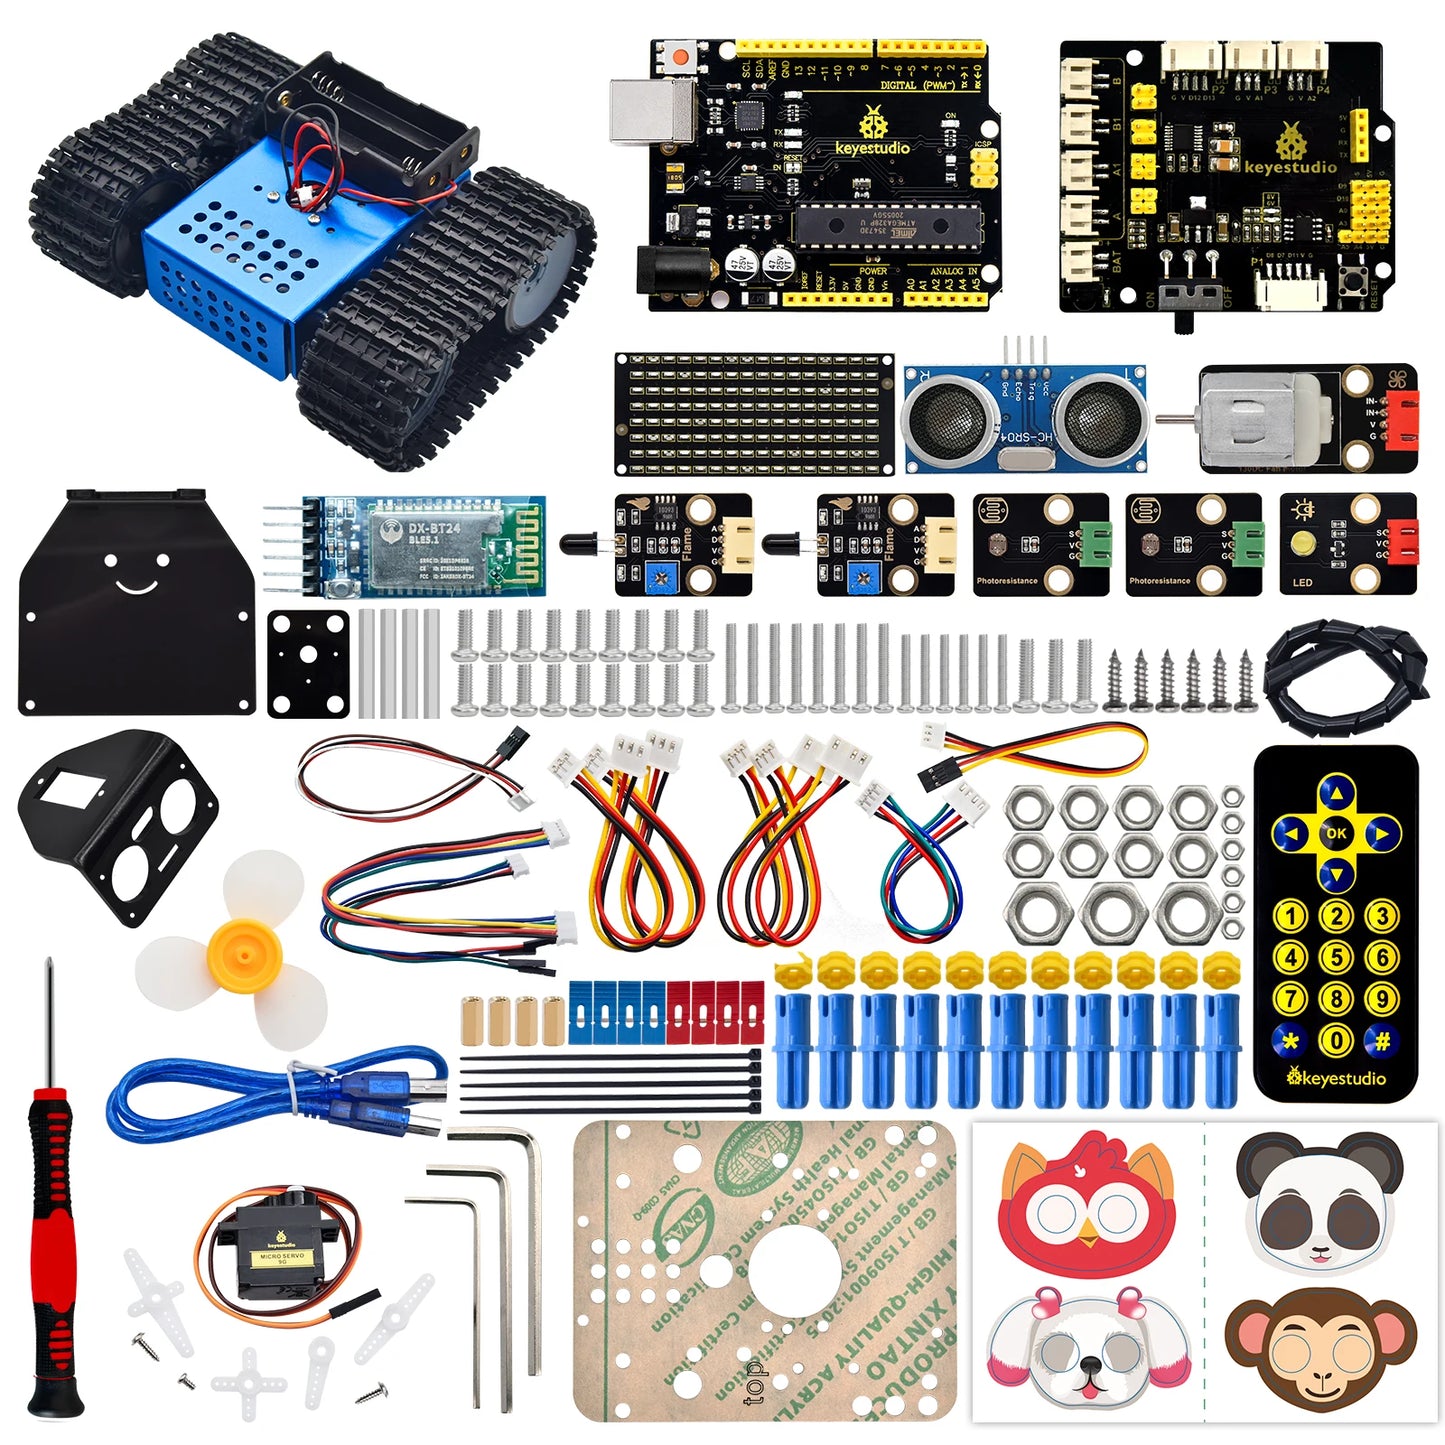 Upgrade your DIY robotics game with the Keyestudio V3.0 DIY Robot Tank Electronic Kit. This advanced kit includes everything you need to build and program your own robotic tank. With its easy-to-use components and precise control, you'll be able to take your robotics skills to the next level. Dominate the competition with this high-tech kit.